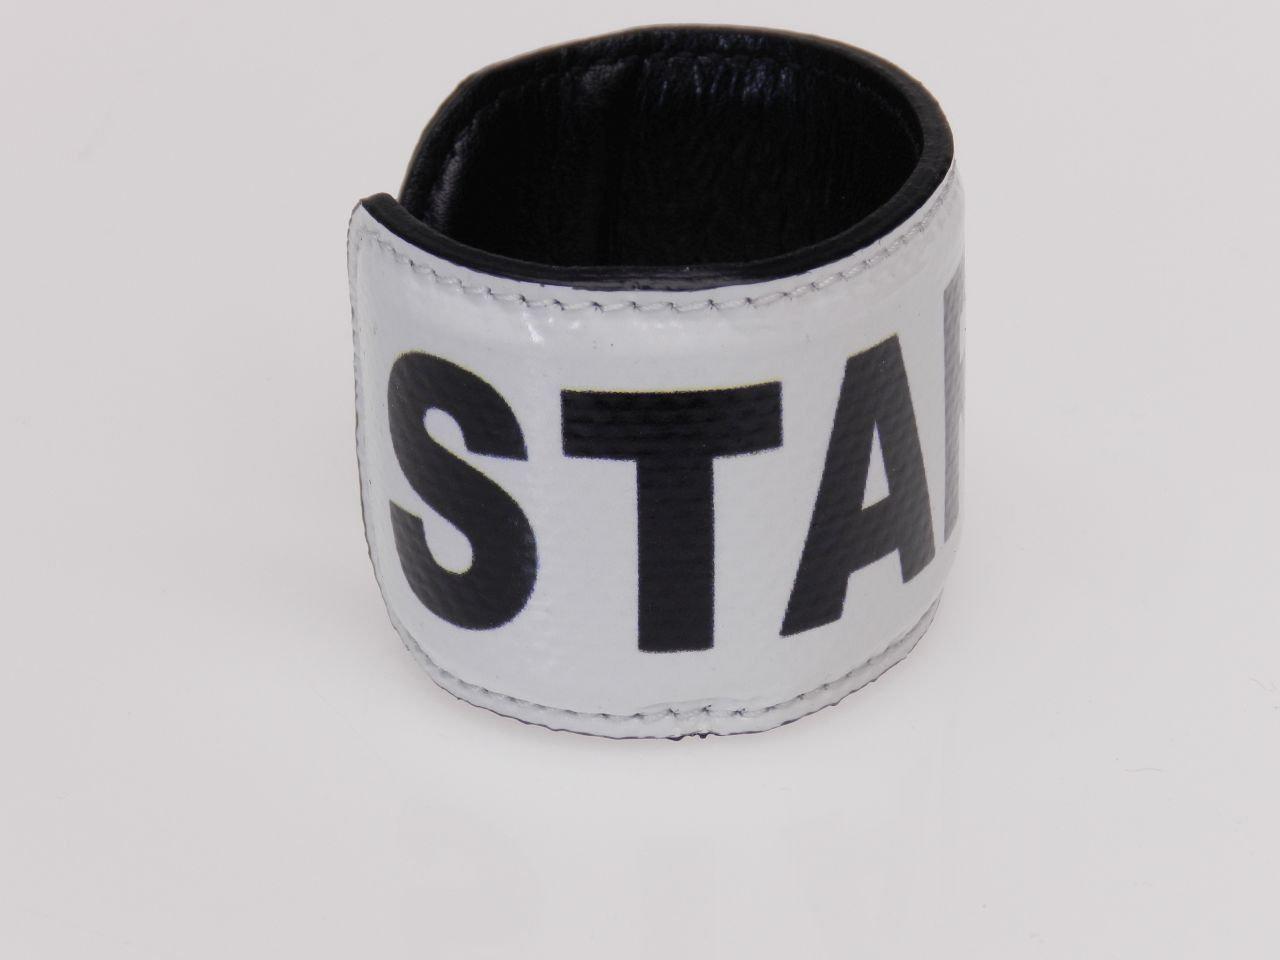 WOMAN BRACELET BLACK AND WHITE "START" - Limited Edition Paul Meccanico